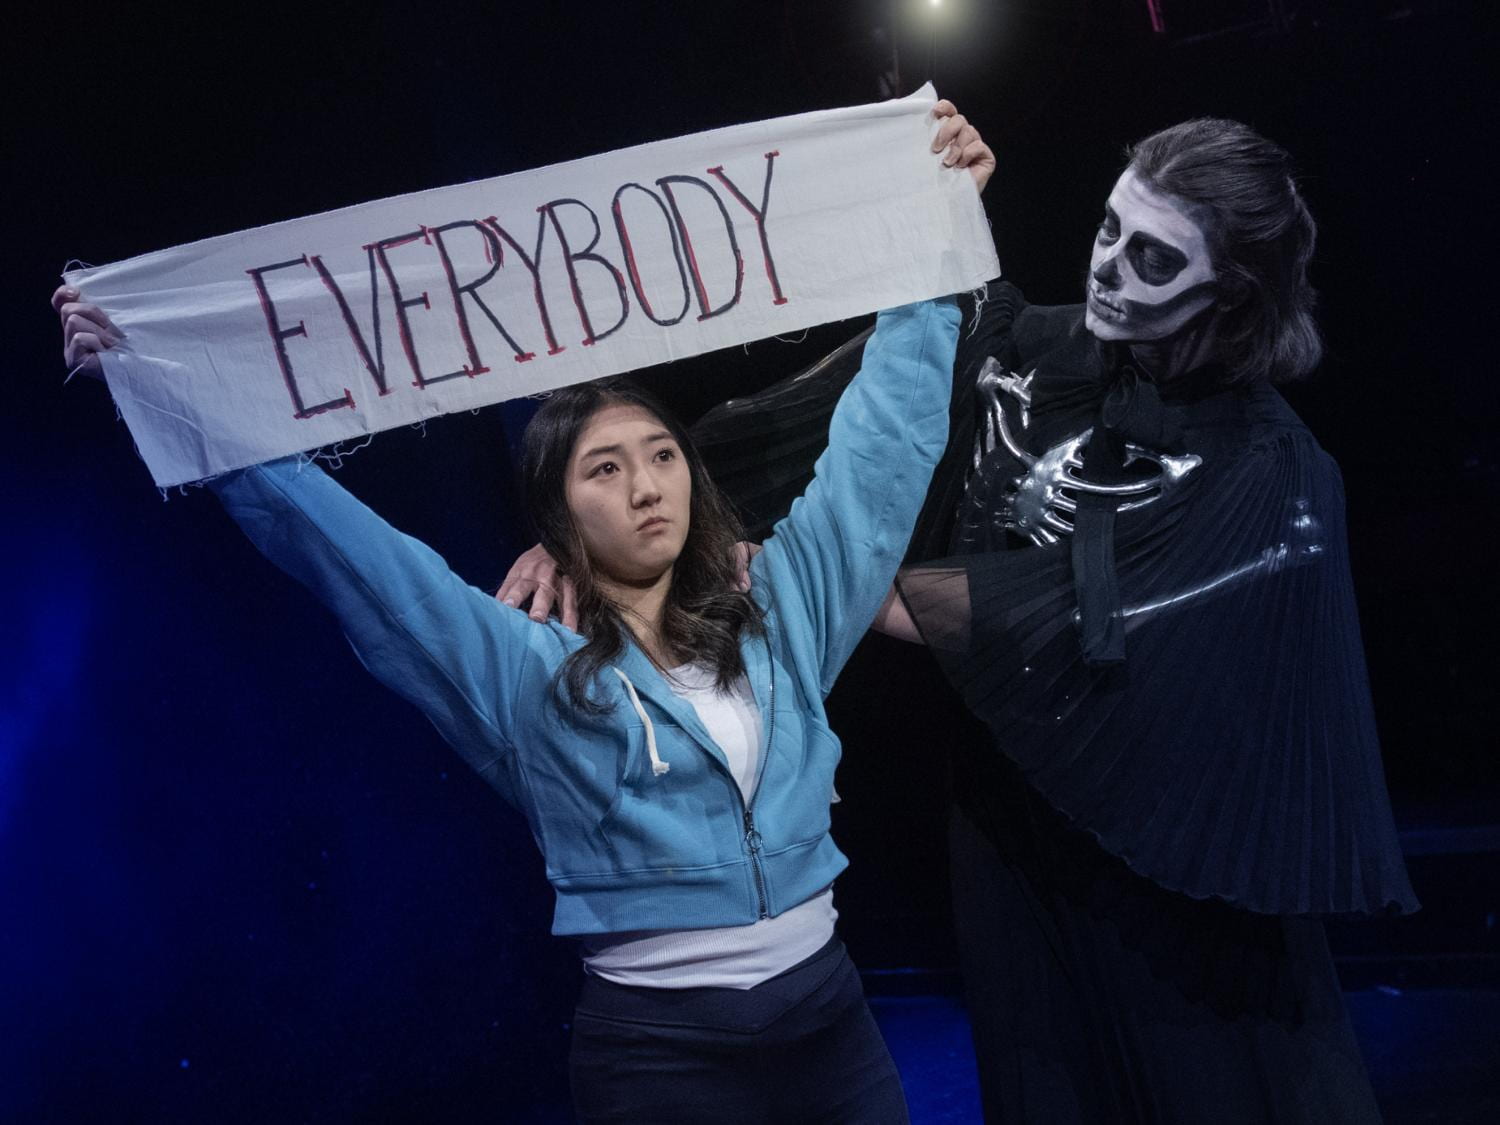 Asian young woman holds a sign marked "Everybody," while a young woman dressed as a skeleton peers over her shoulder.